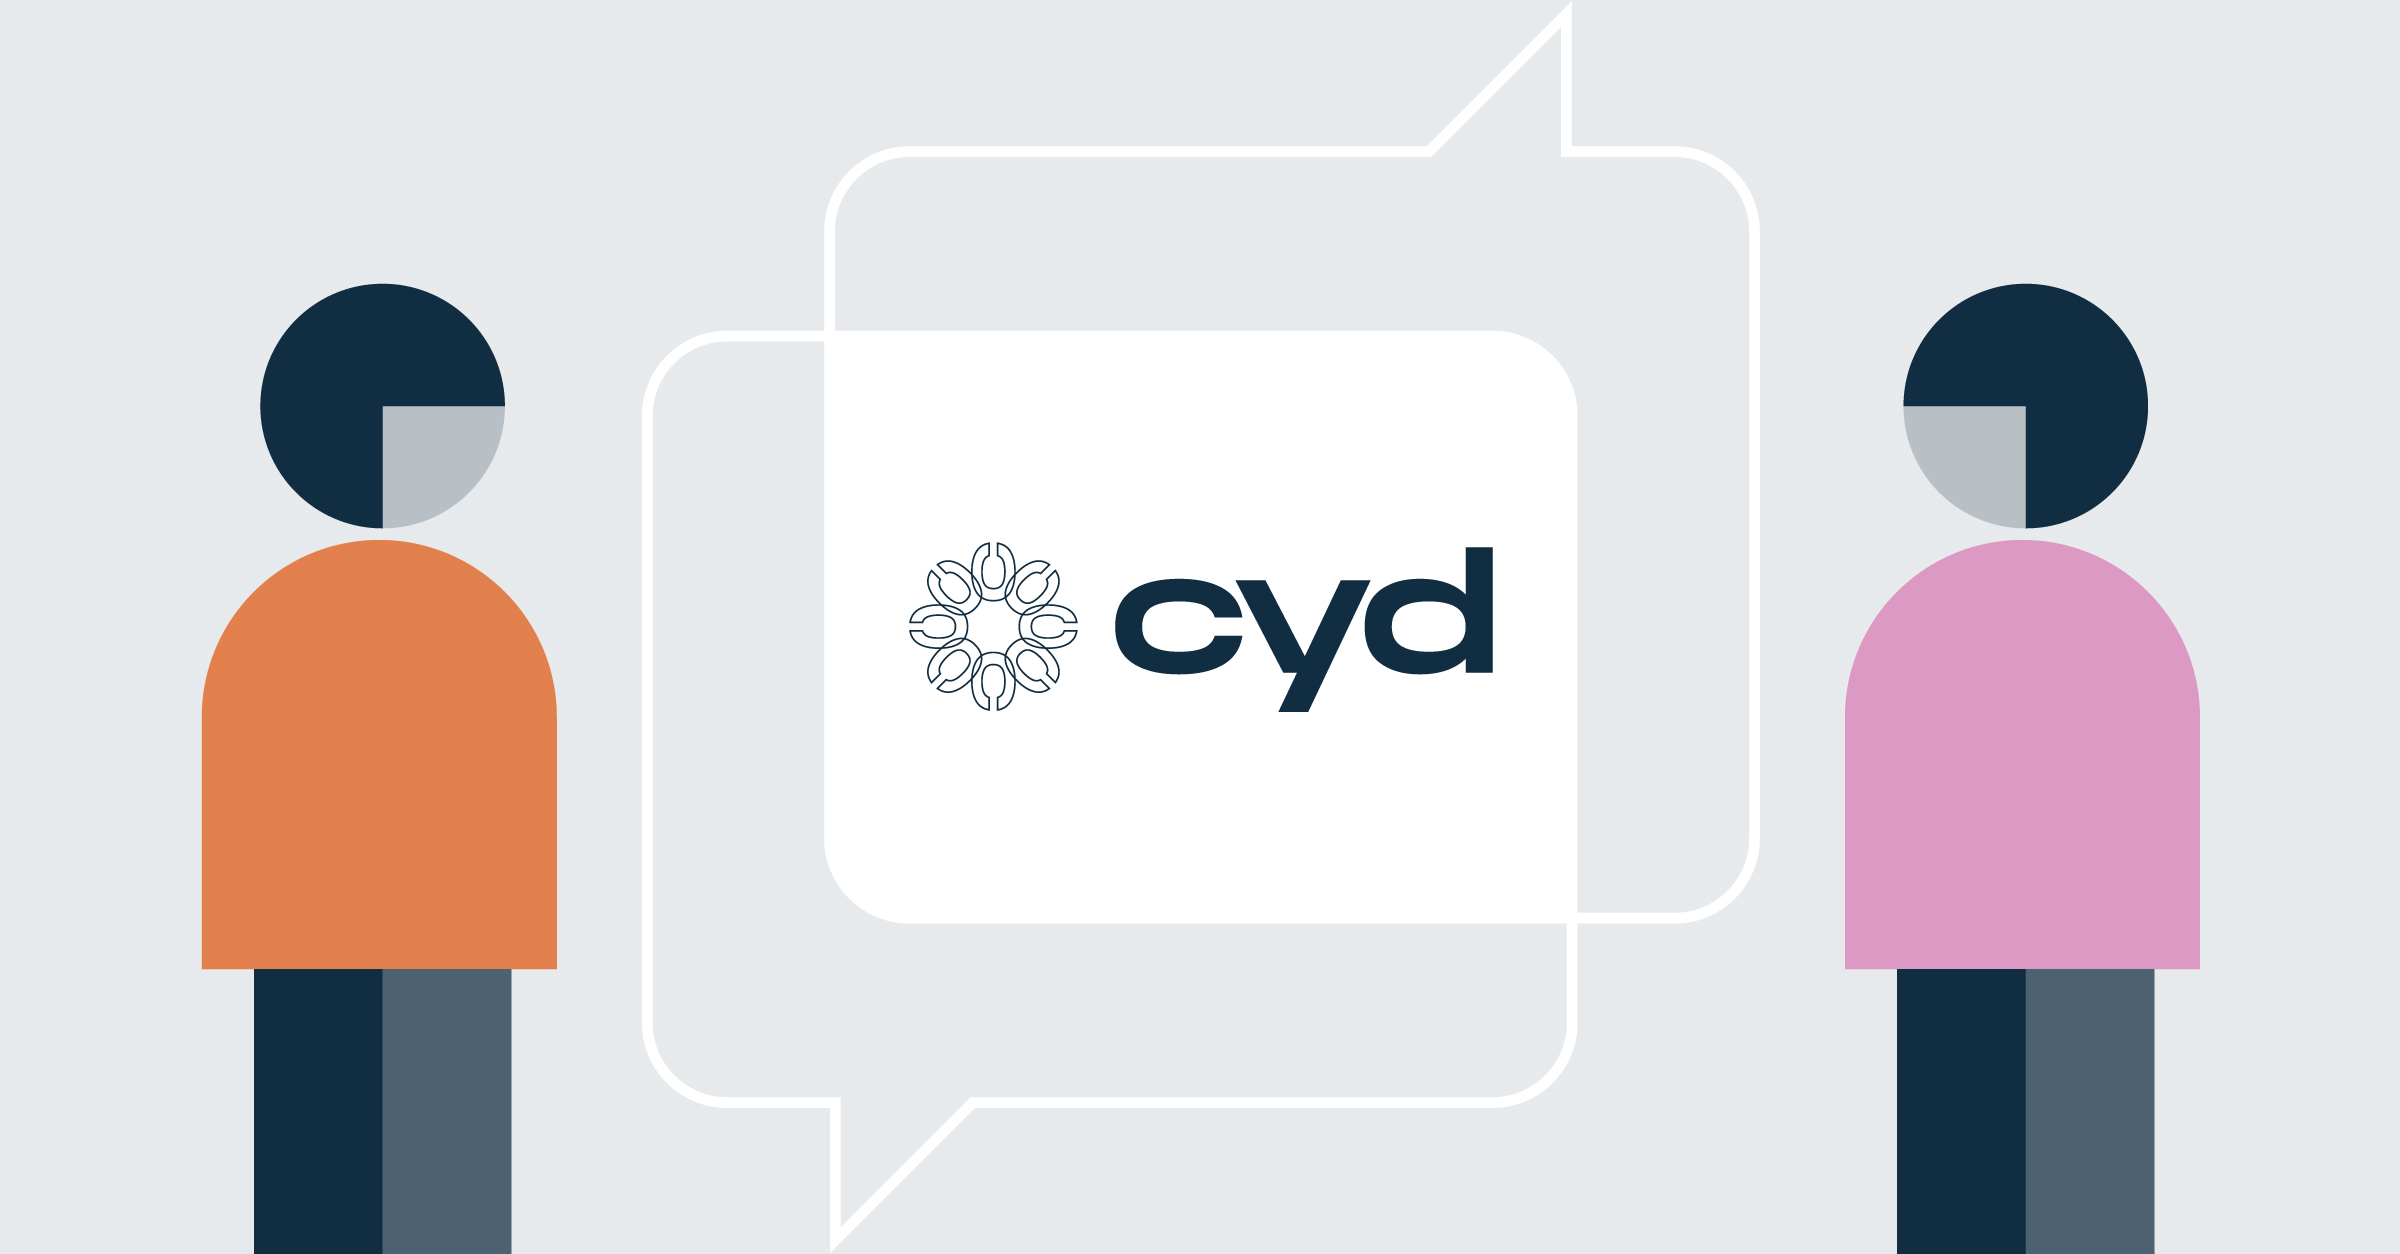 Two digitally drawn people facing each other for a conversation. Between them there is a white board on the wall with the Cyd logo at its centre